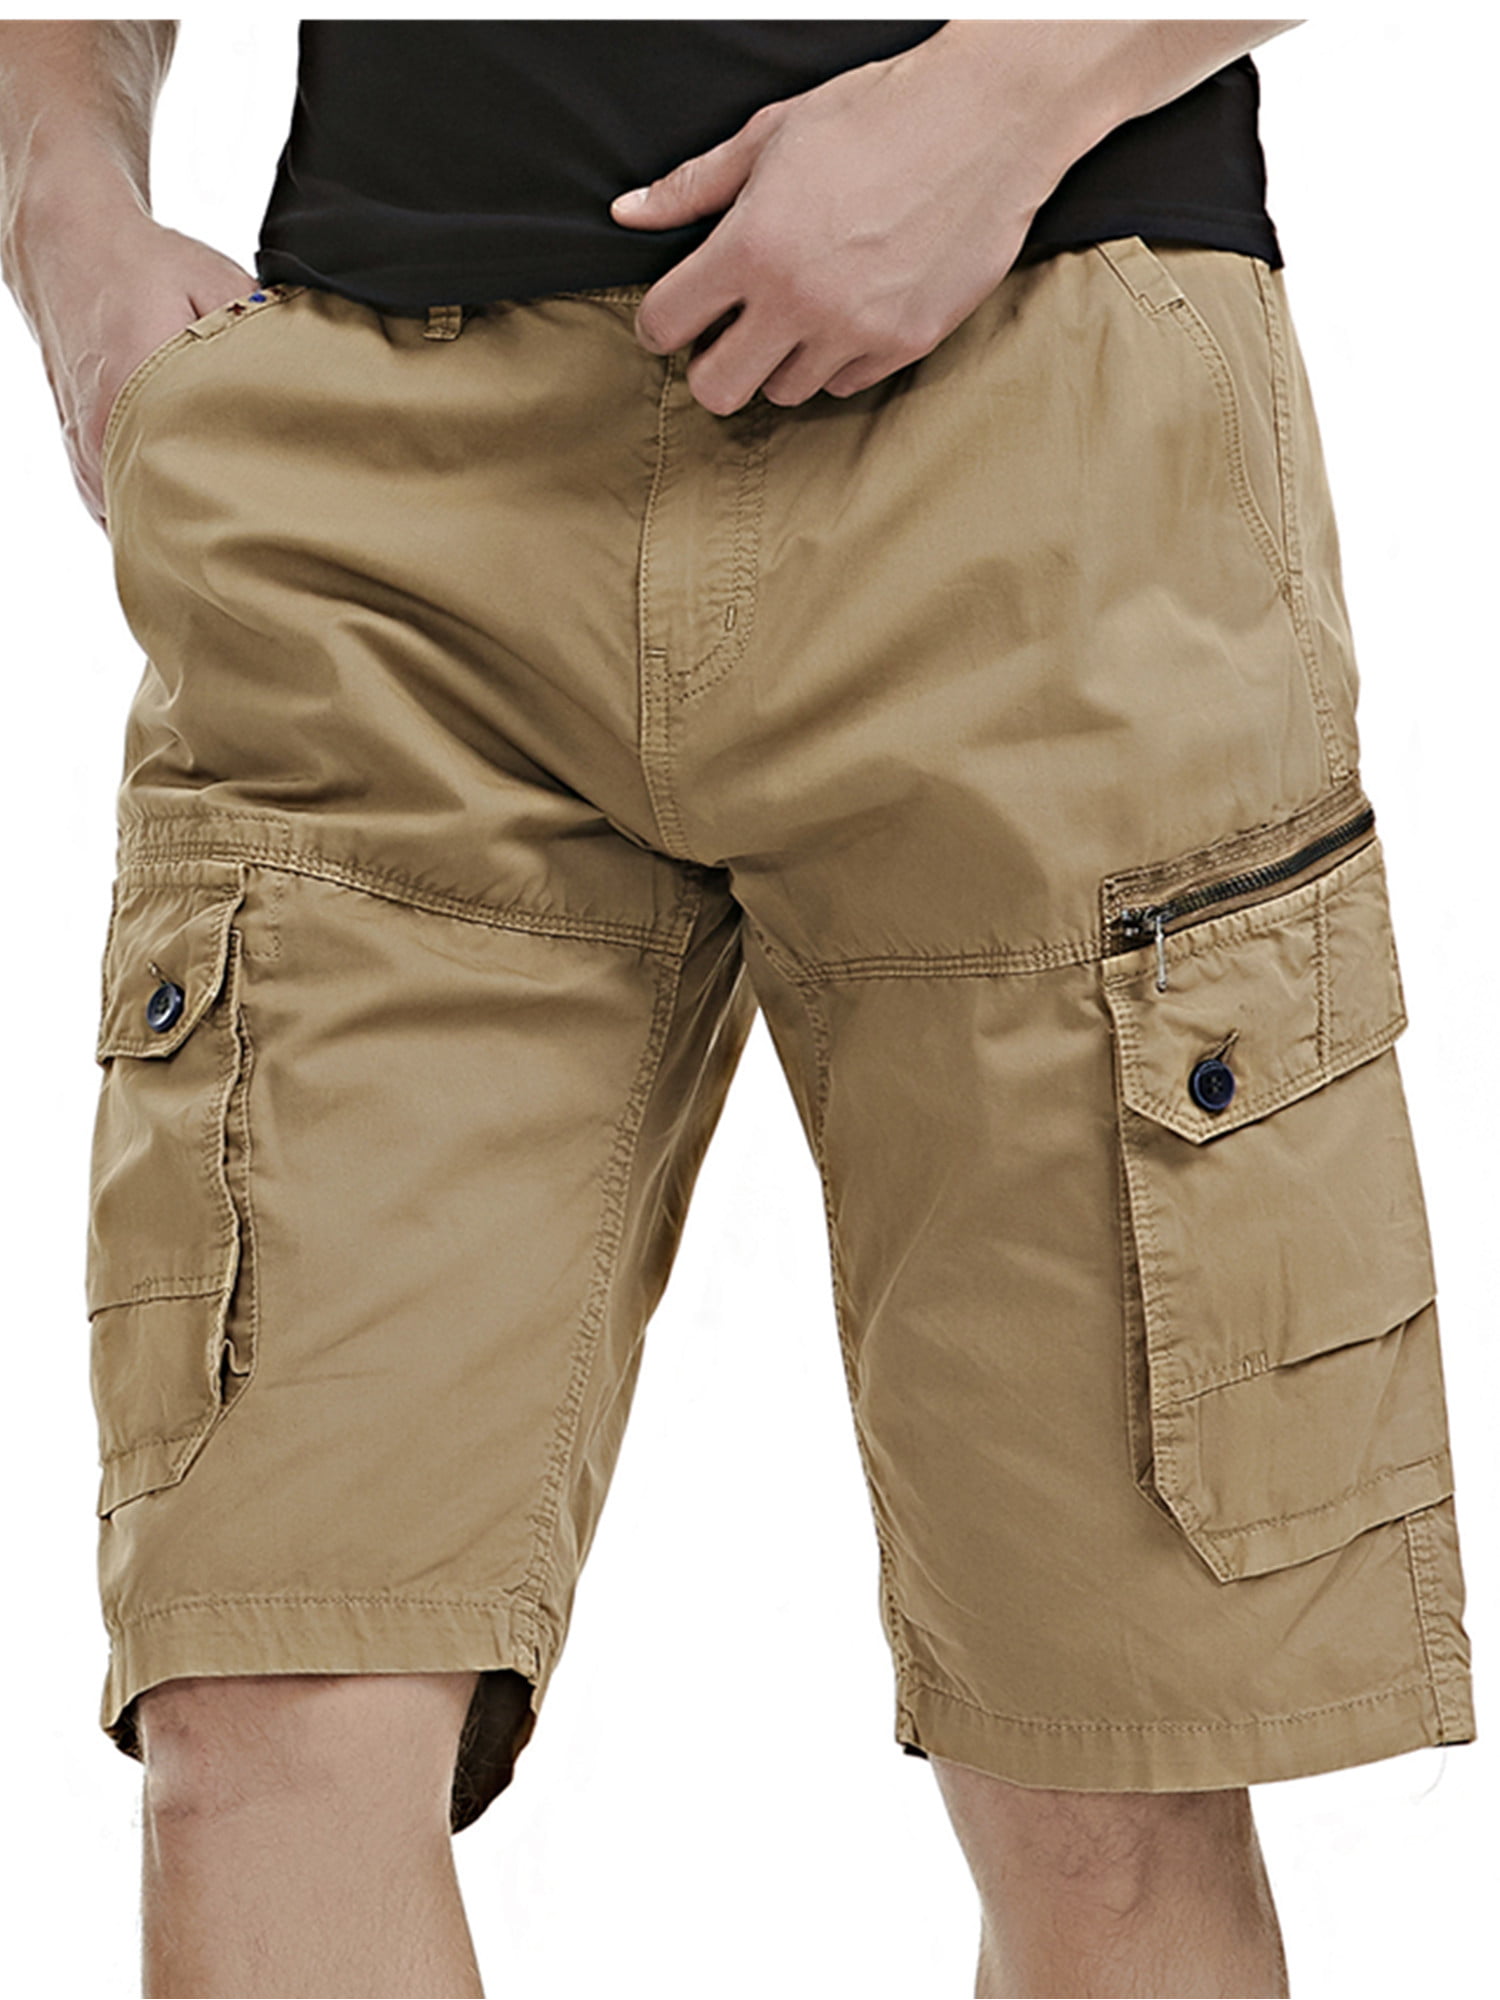 Toamen Plus Size Mens Shorts Casual Relaxed Fit Lightweight Elastic Waist Sport Outdoor Cargo Short with Multi Pockets 